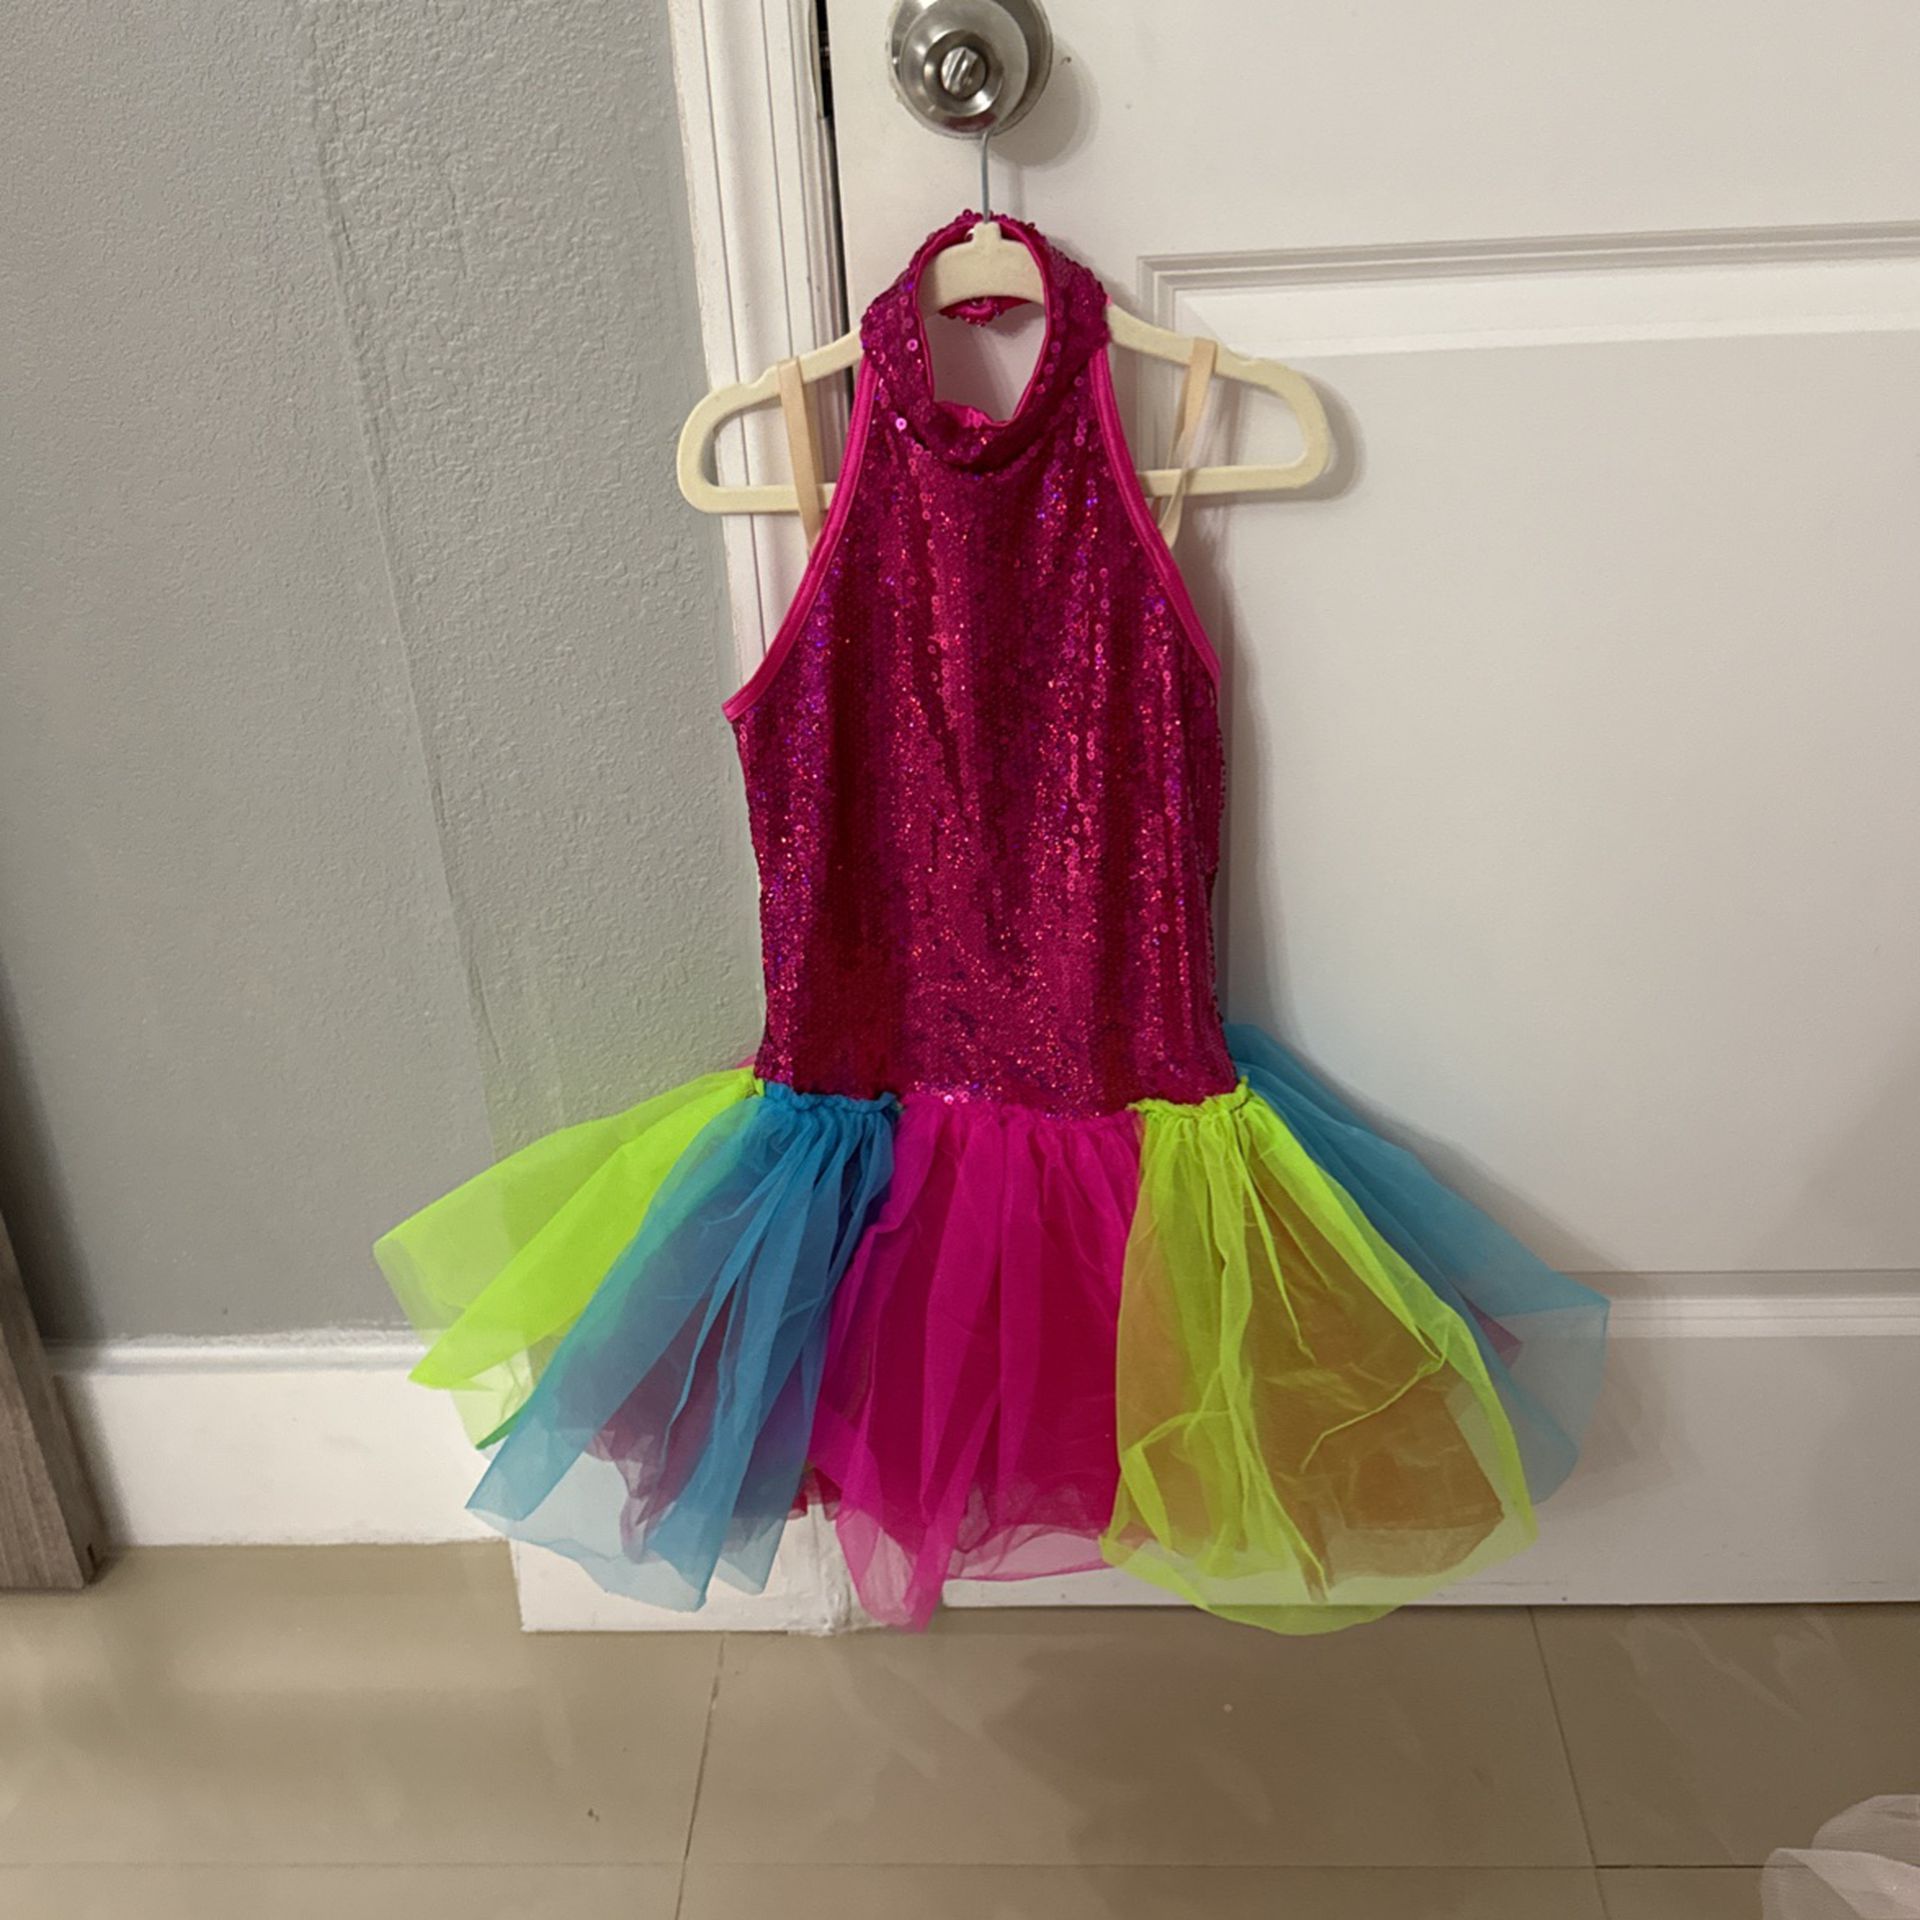 Dancer Outfit / Halloween Costume 